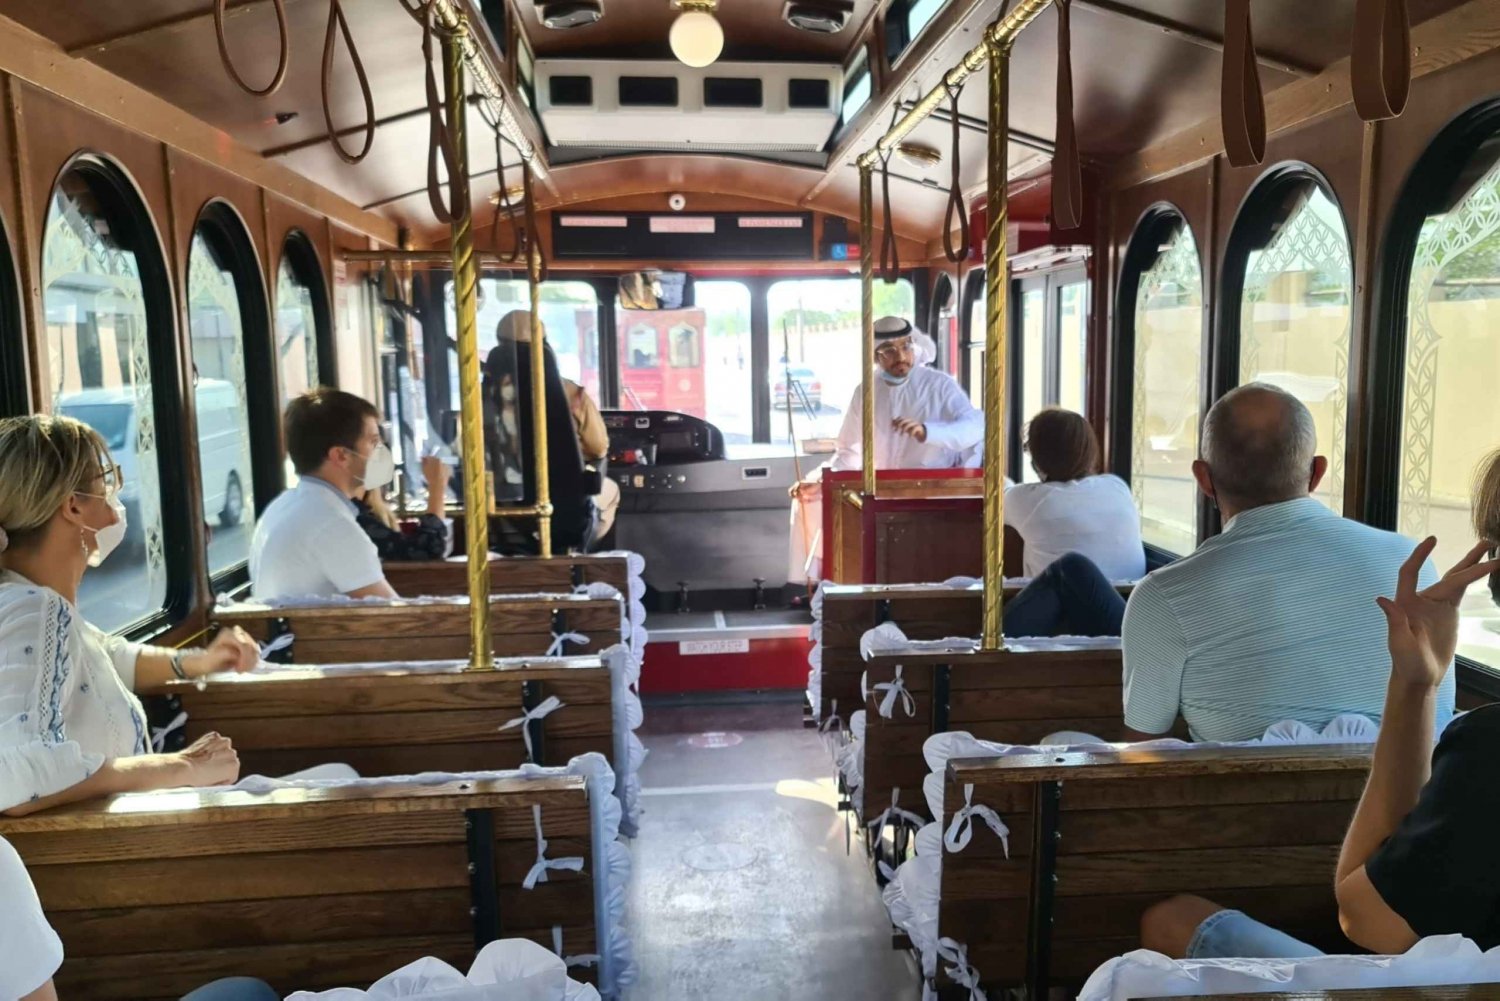 Dubai: Heritage Express Cultural Trolley Tour with Drinks